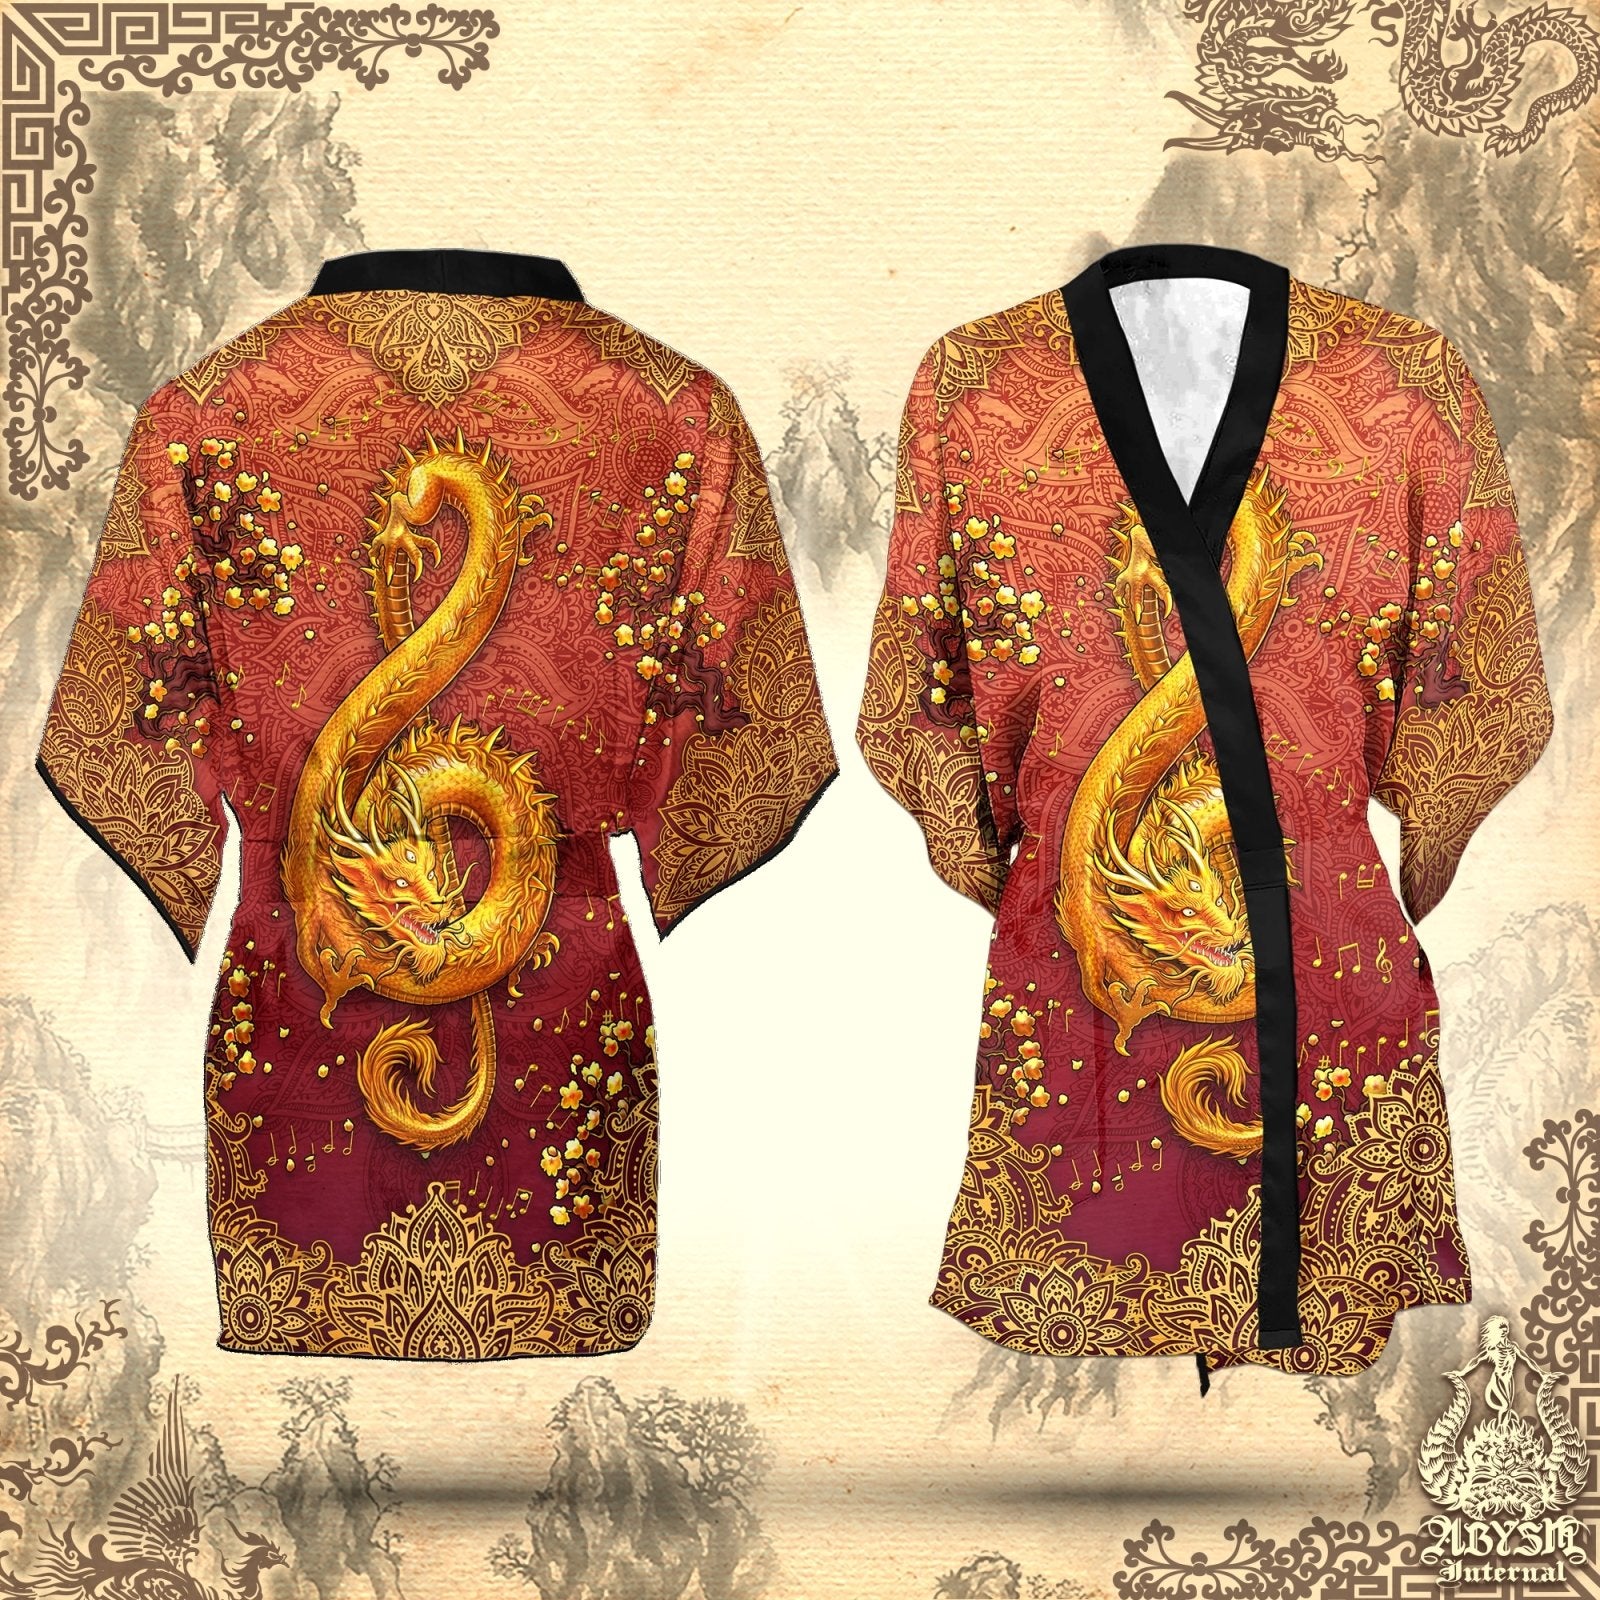 Boho Music Cover Up, Beach Outfit, Party Kimono, Summer Festival Robe, Indie and Alternative Clothing, Unisex - Dragon, Mandala - Abysm Internal